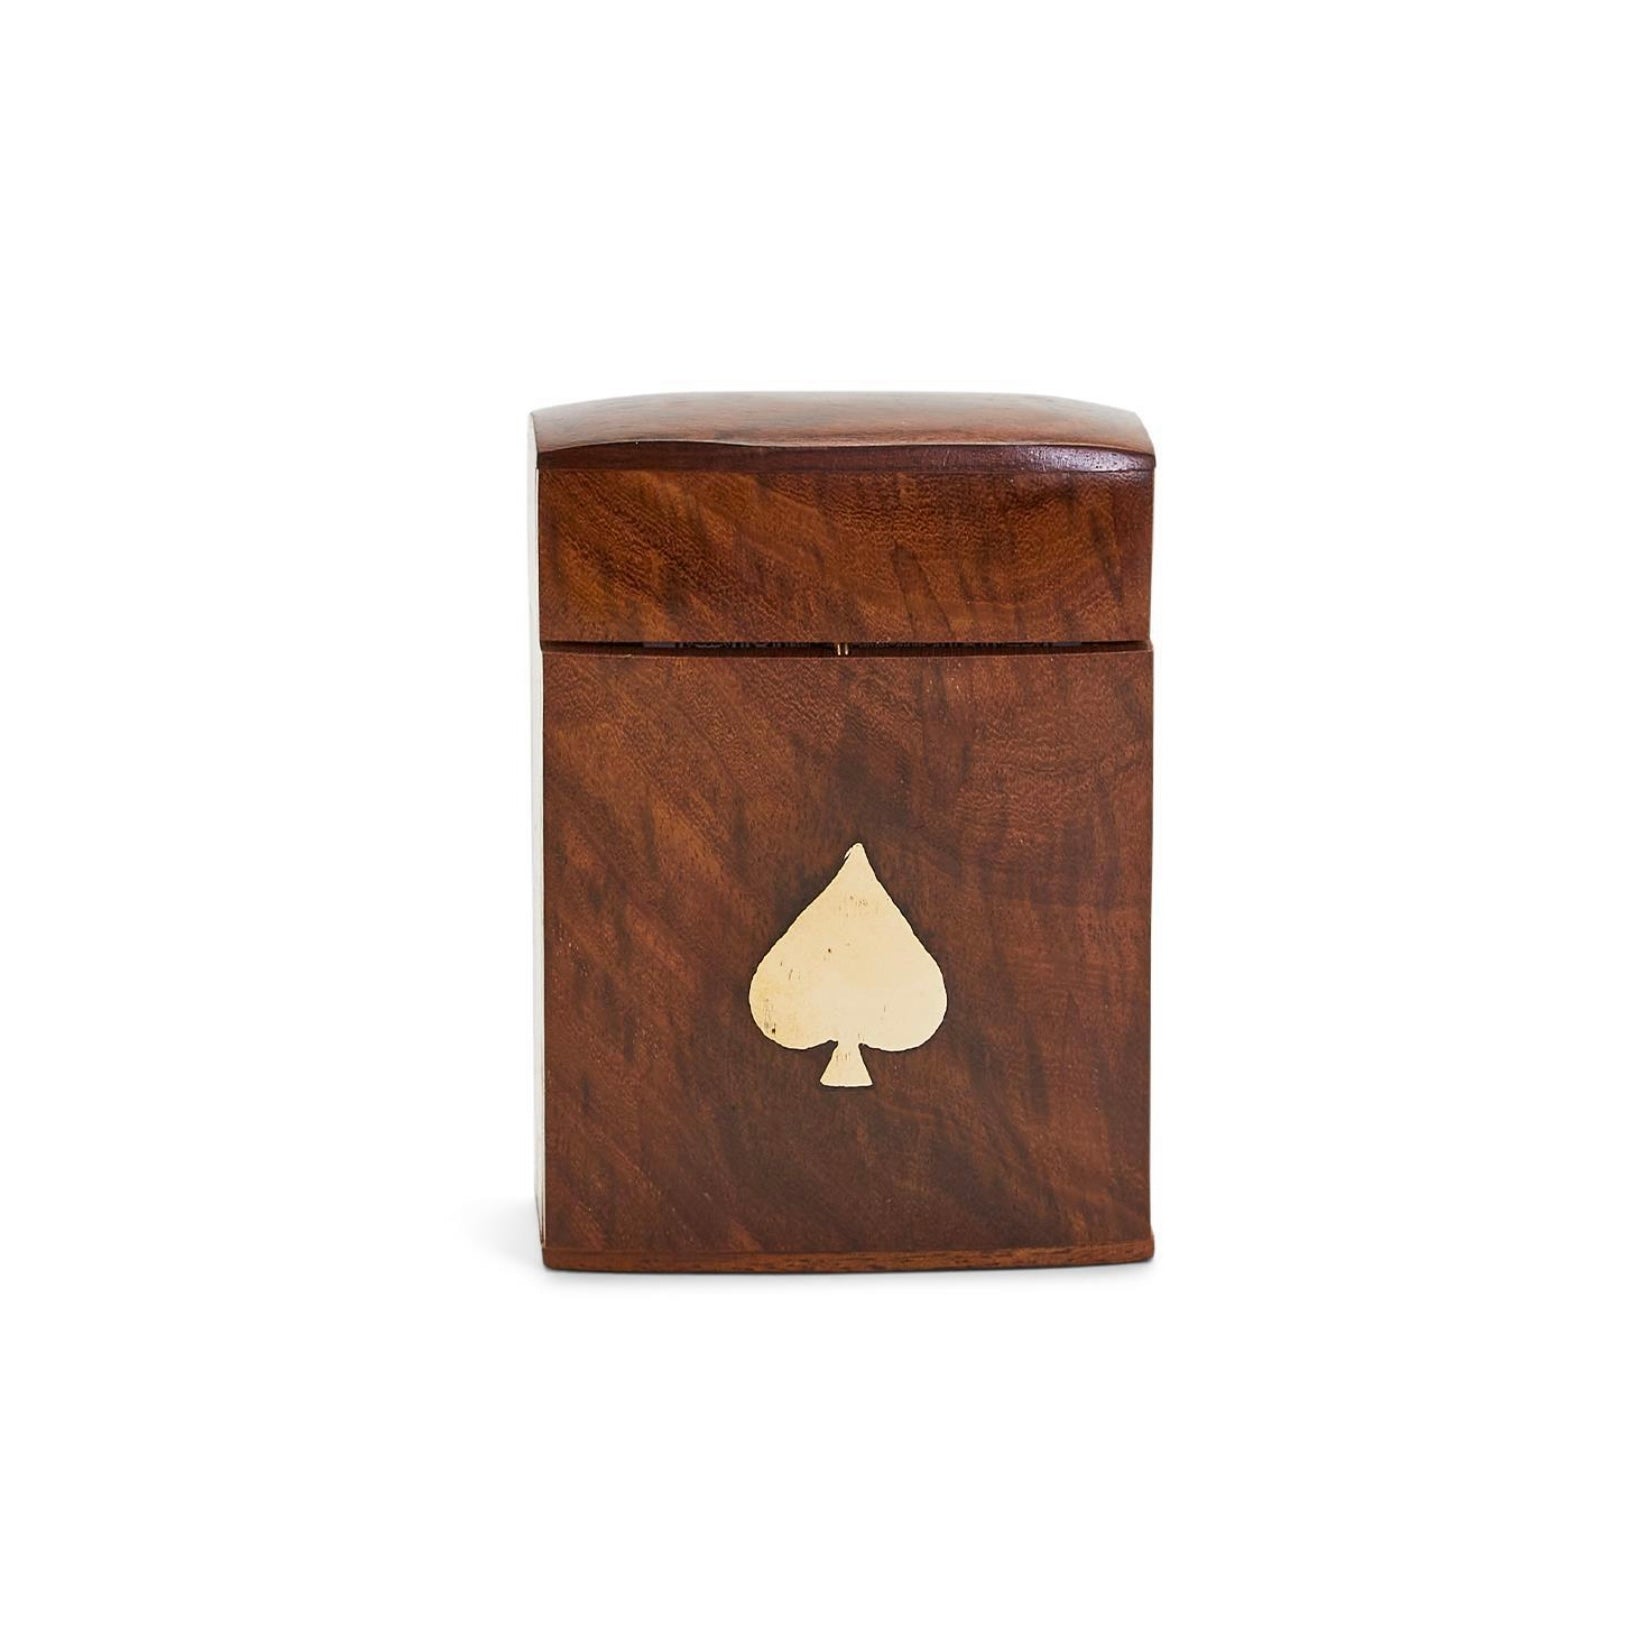 Wood Crafted Playing Card Set in Wooden Box